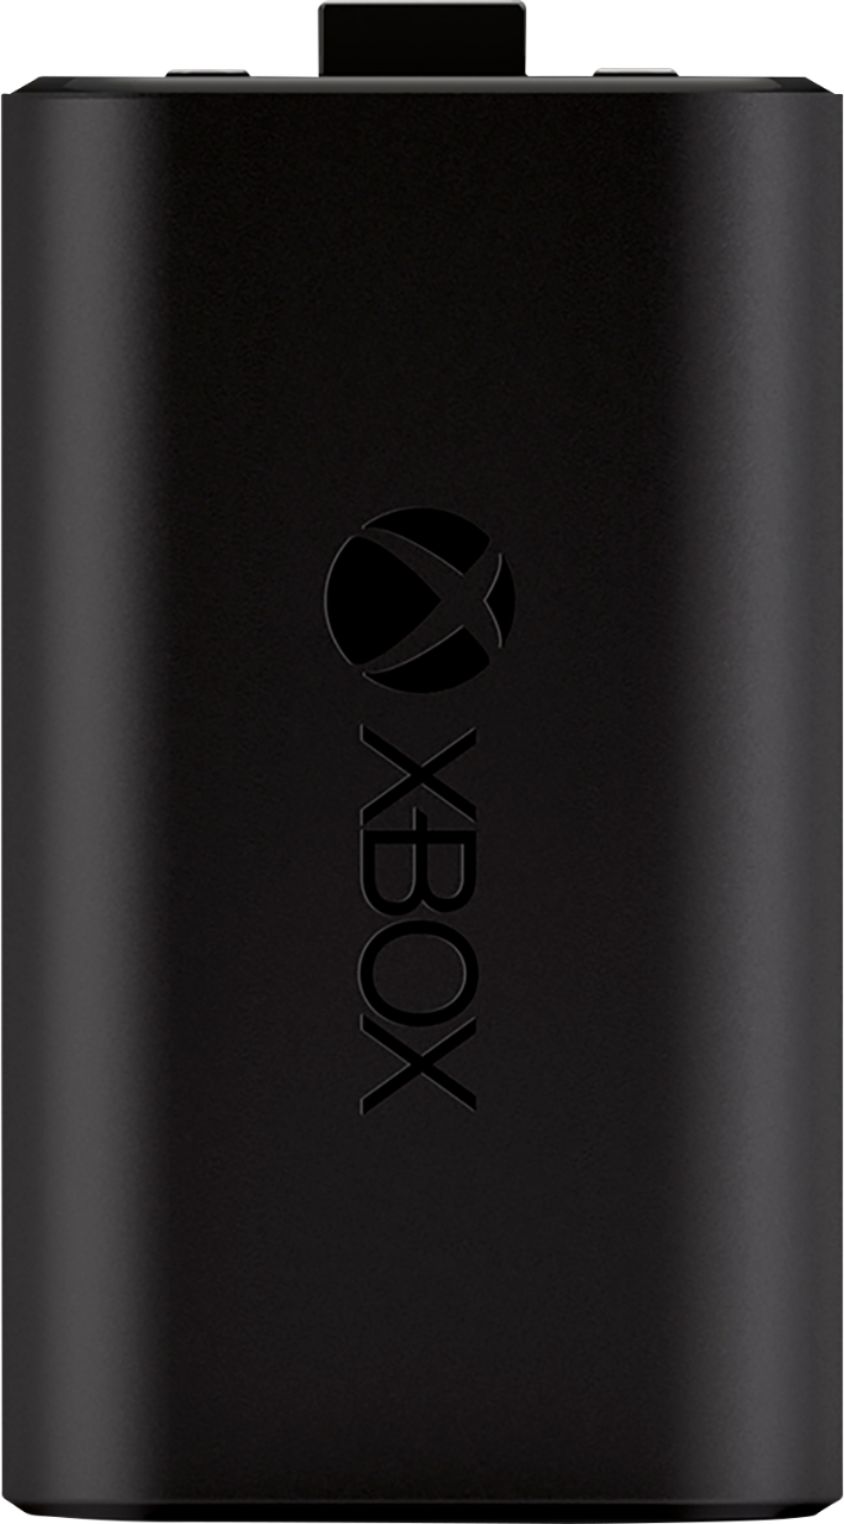 play and charge kit xbox series x